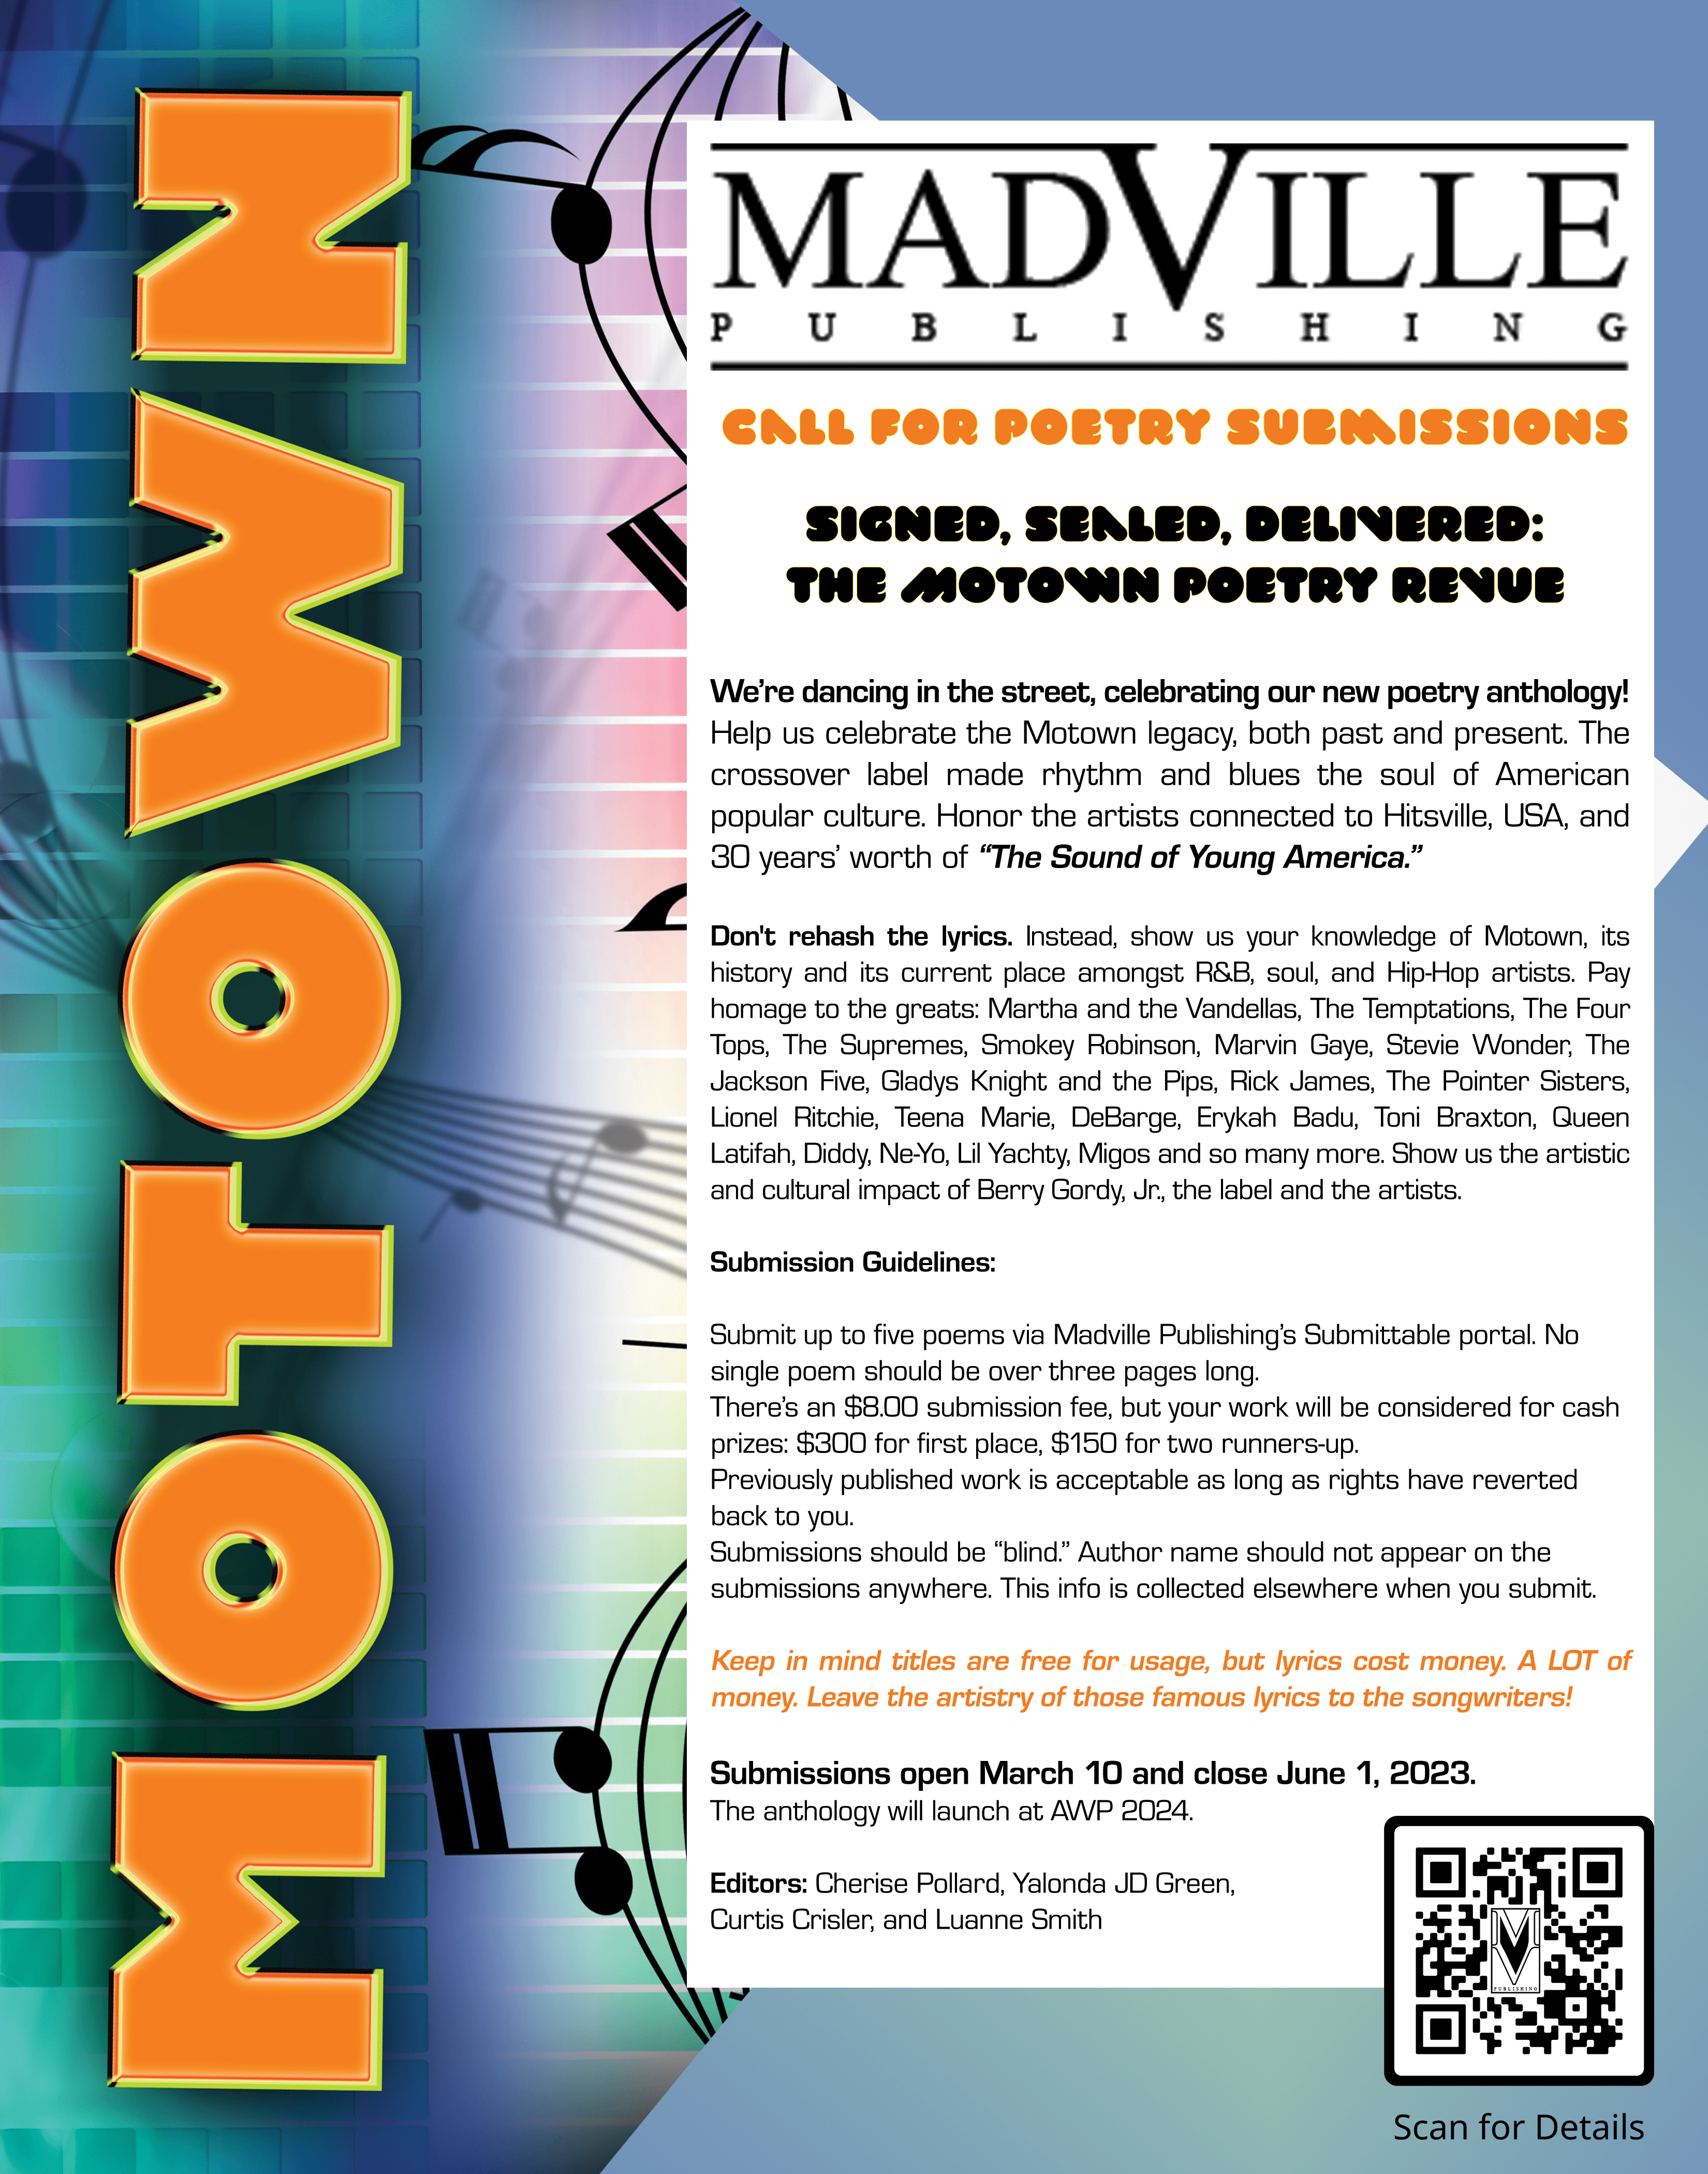 Signed, Sealed, Delivered: The Motown Poetry Review, call for submissions by Madville Publishing. Flyer shows a brightly colored background with the word MOTOWN IN BRIGHT ORANGE with a QR code at bottom right that leads to the submissions page for more information